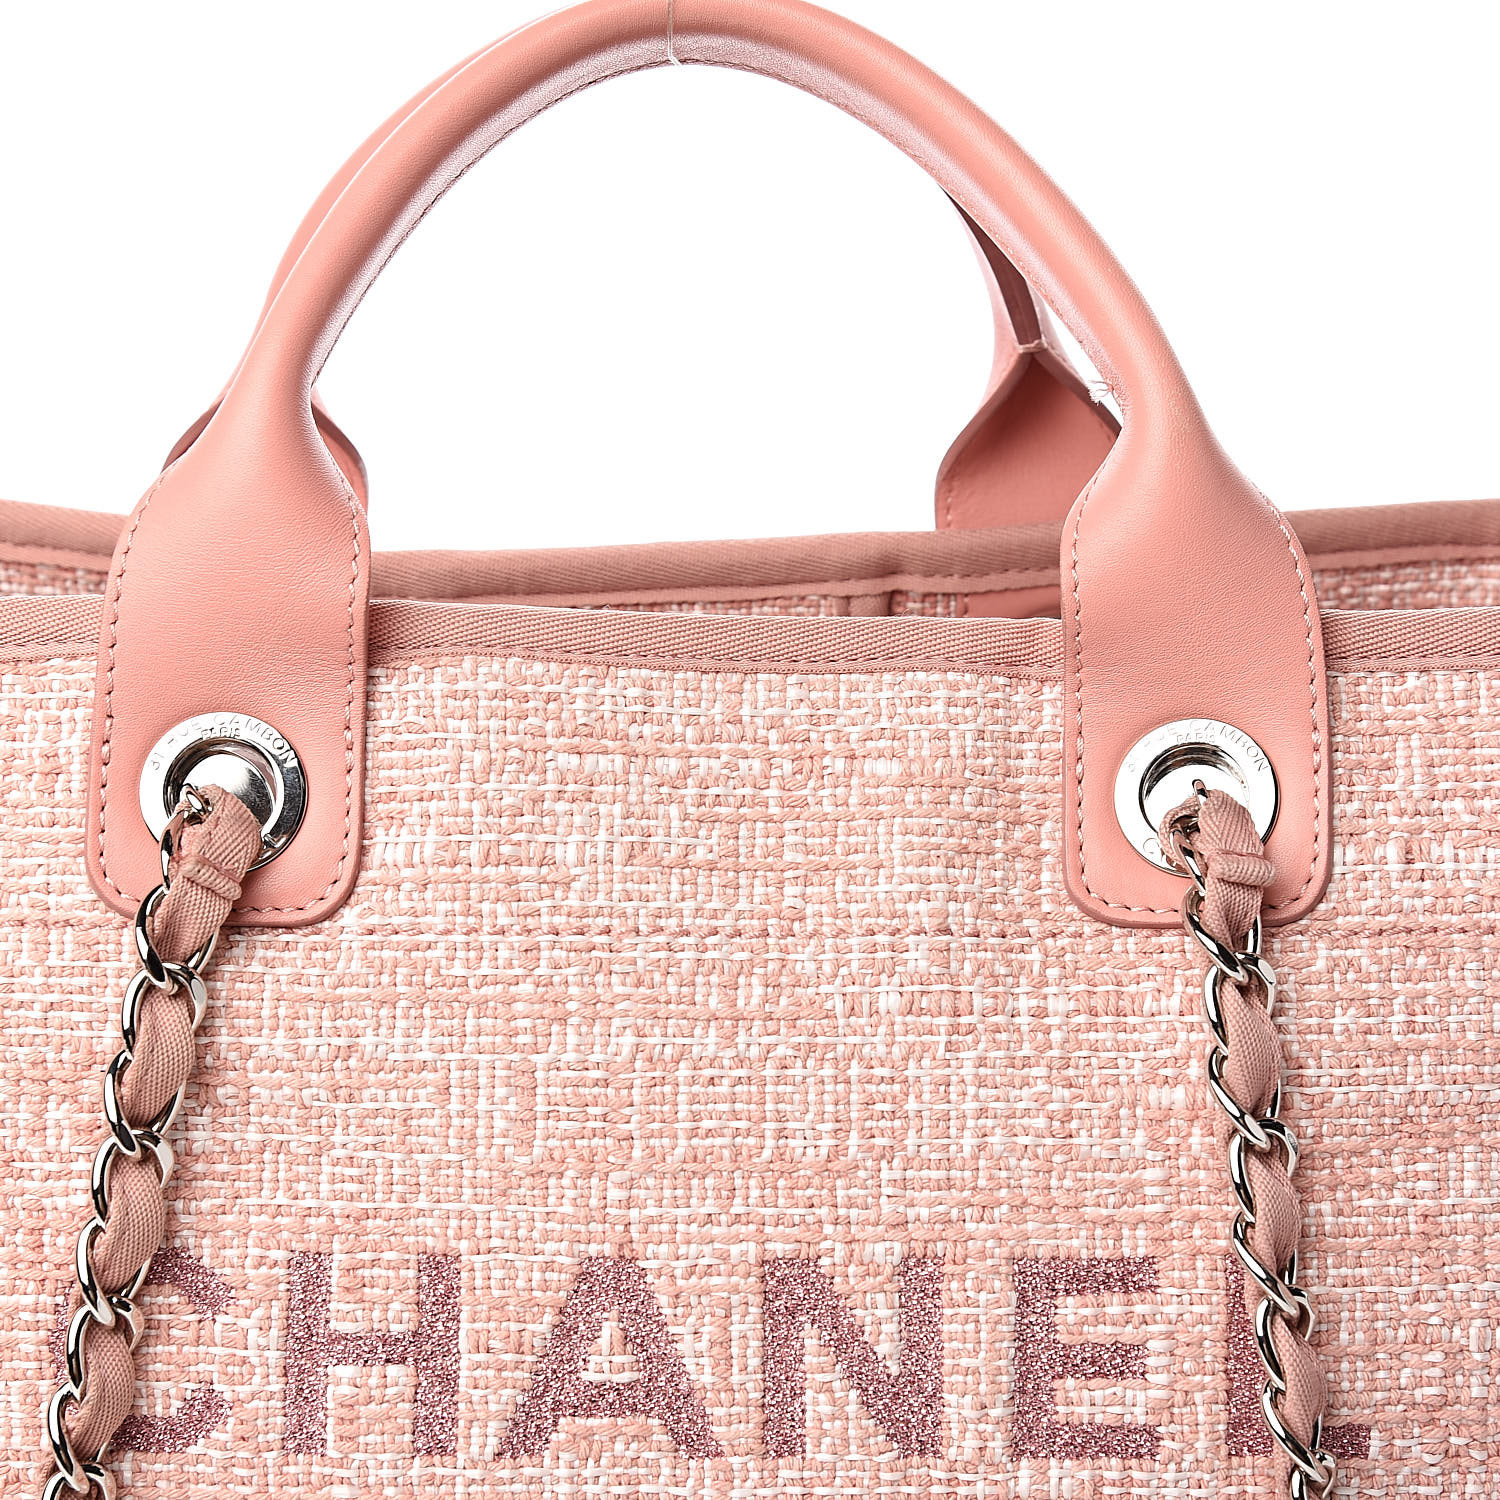 CHANEL Canvas Medium Deauville Tote Pink 530235